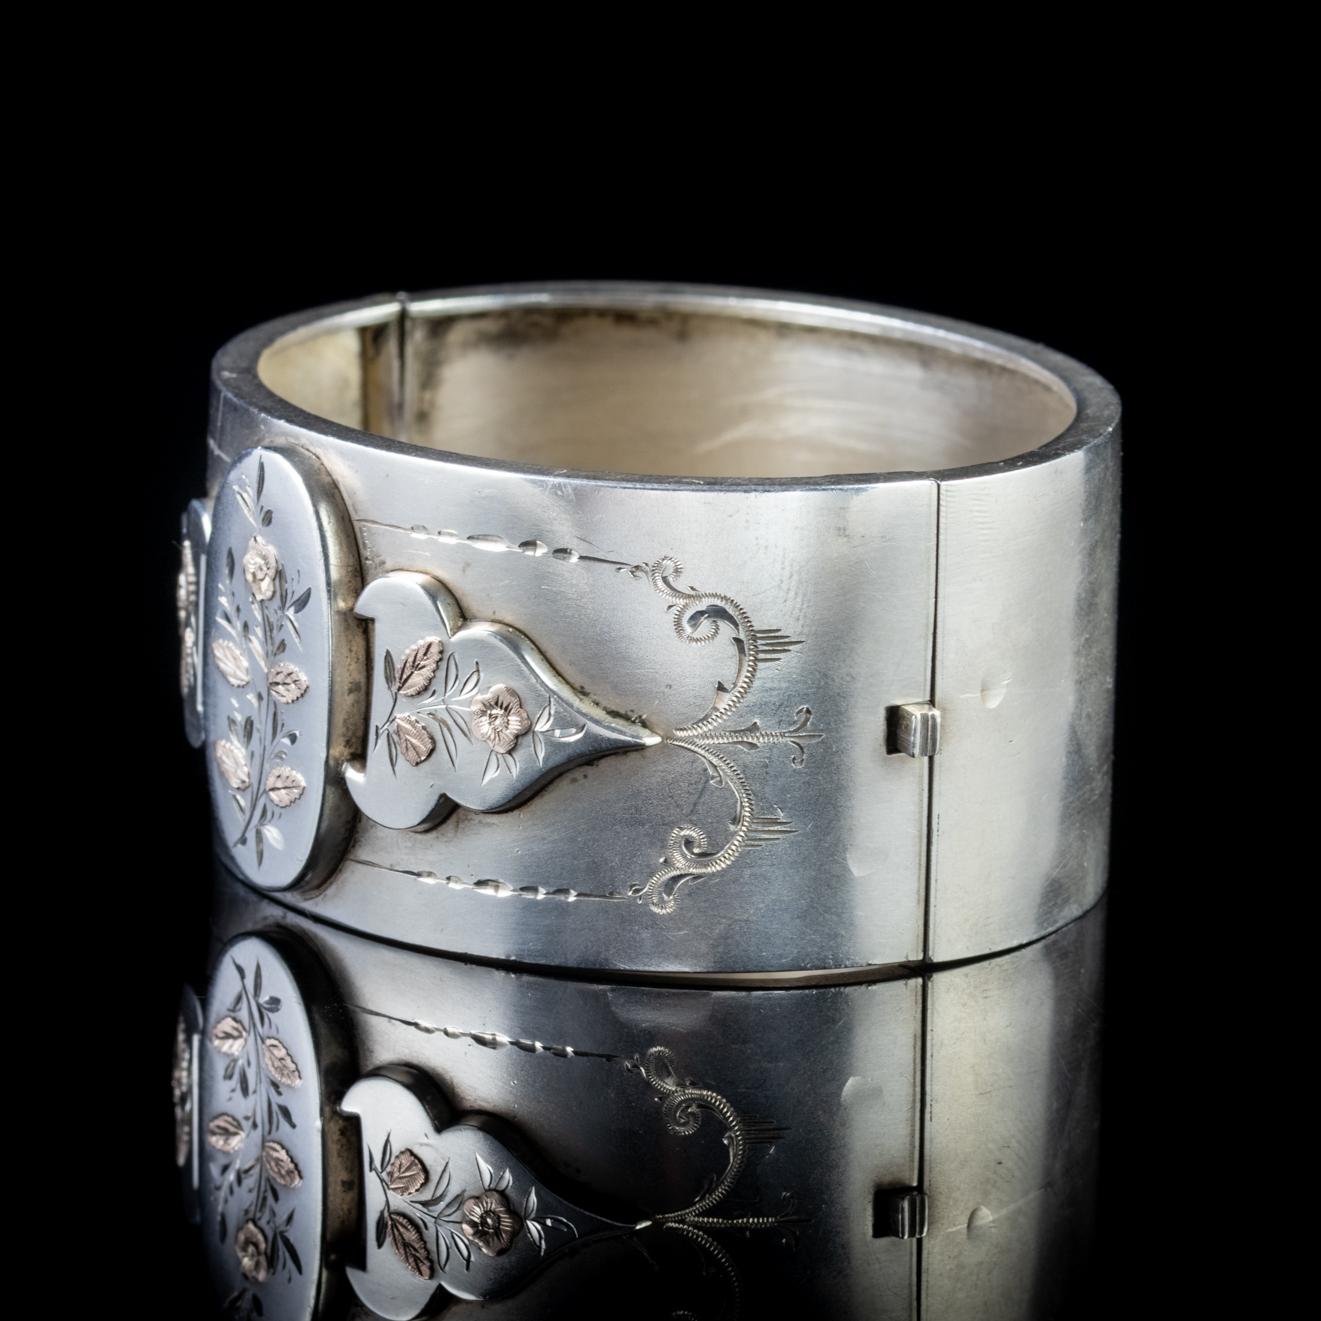 A fabulous antique Victorian bangle showcasing a stunning front gallery with a decorative engraved border and three detailed 18ct Rose Gold Forget me nots.

Forget me nots in an old German tale were discovered by two lovers walking by a river one